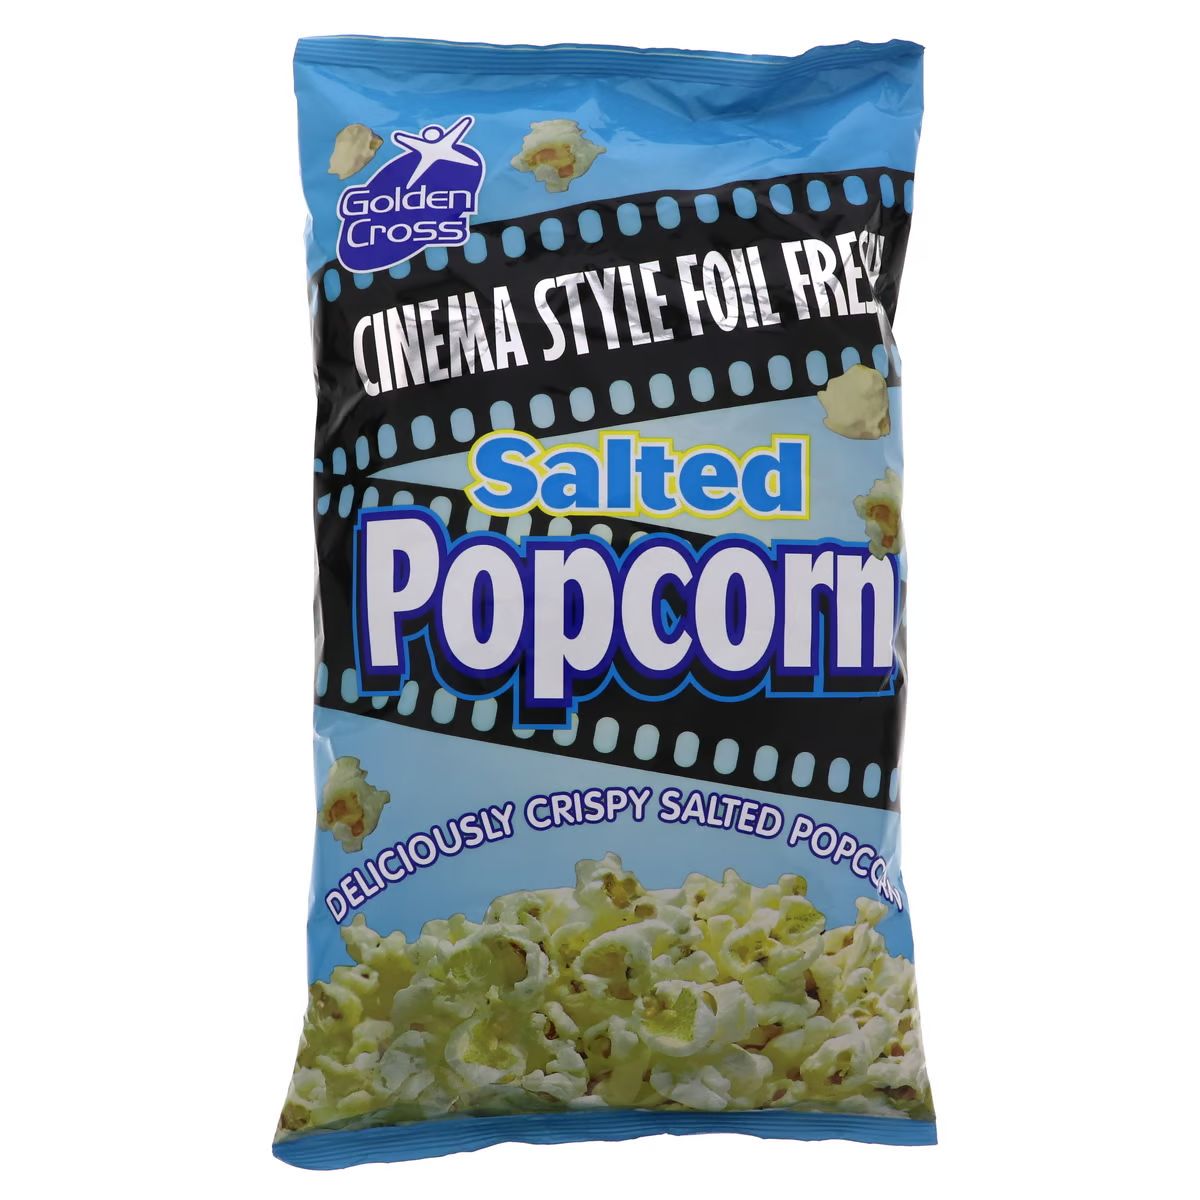 A bag of Golden Cross - Salted Popcorn - 150g on a white background.